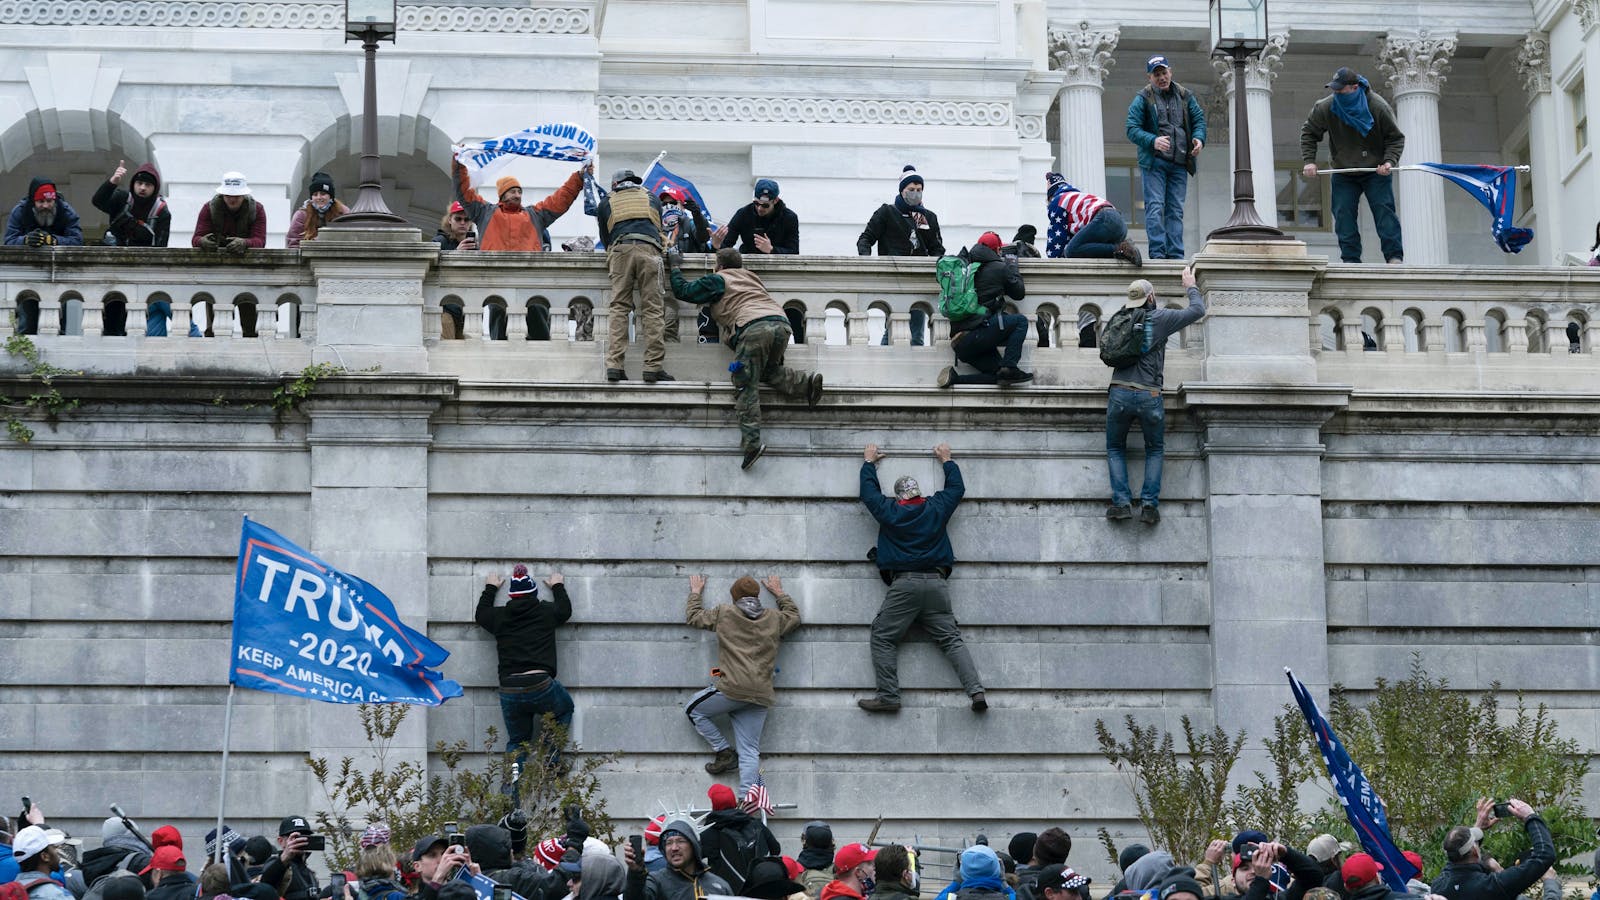 Protesters storming the Capitol building. Photo by AP